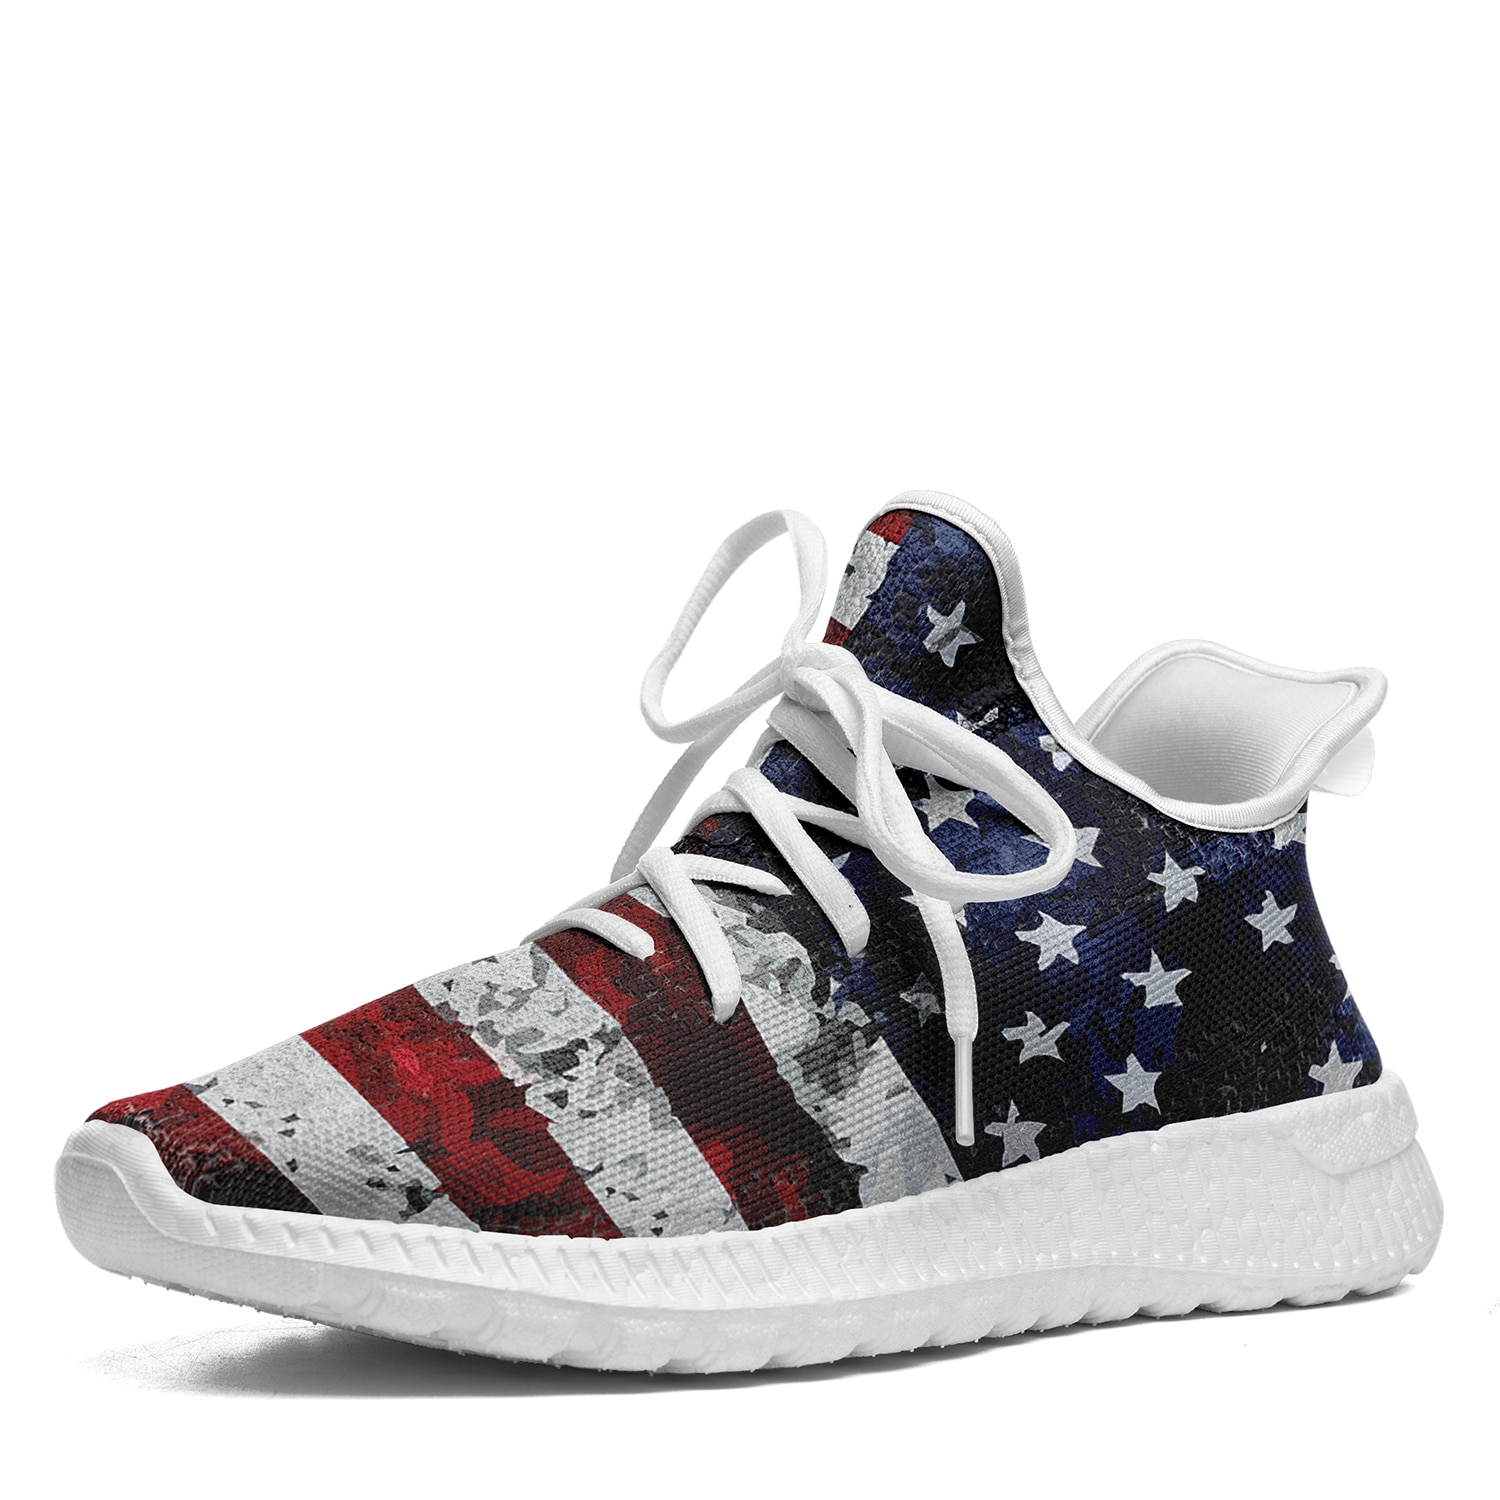 USA America Flag Shoes Patriotic Print On Demand Slip-on Mens Sneakers Lightweight Athletic Running Walking Shoes Drop shipping